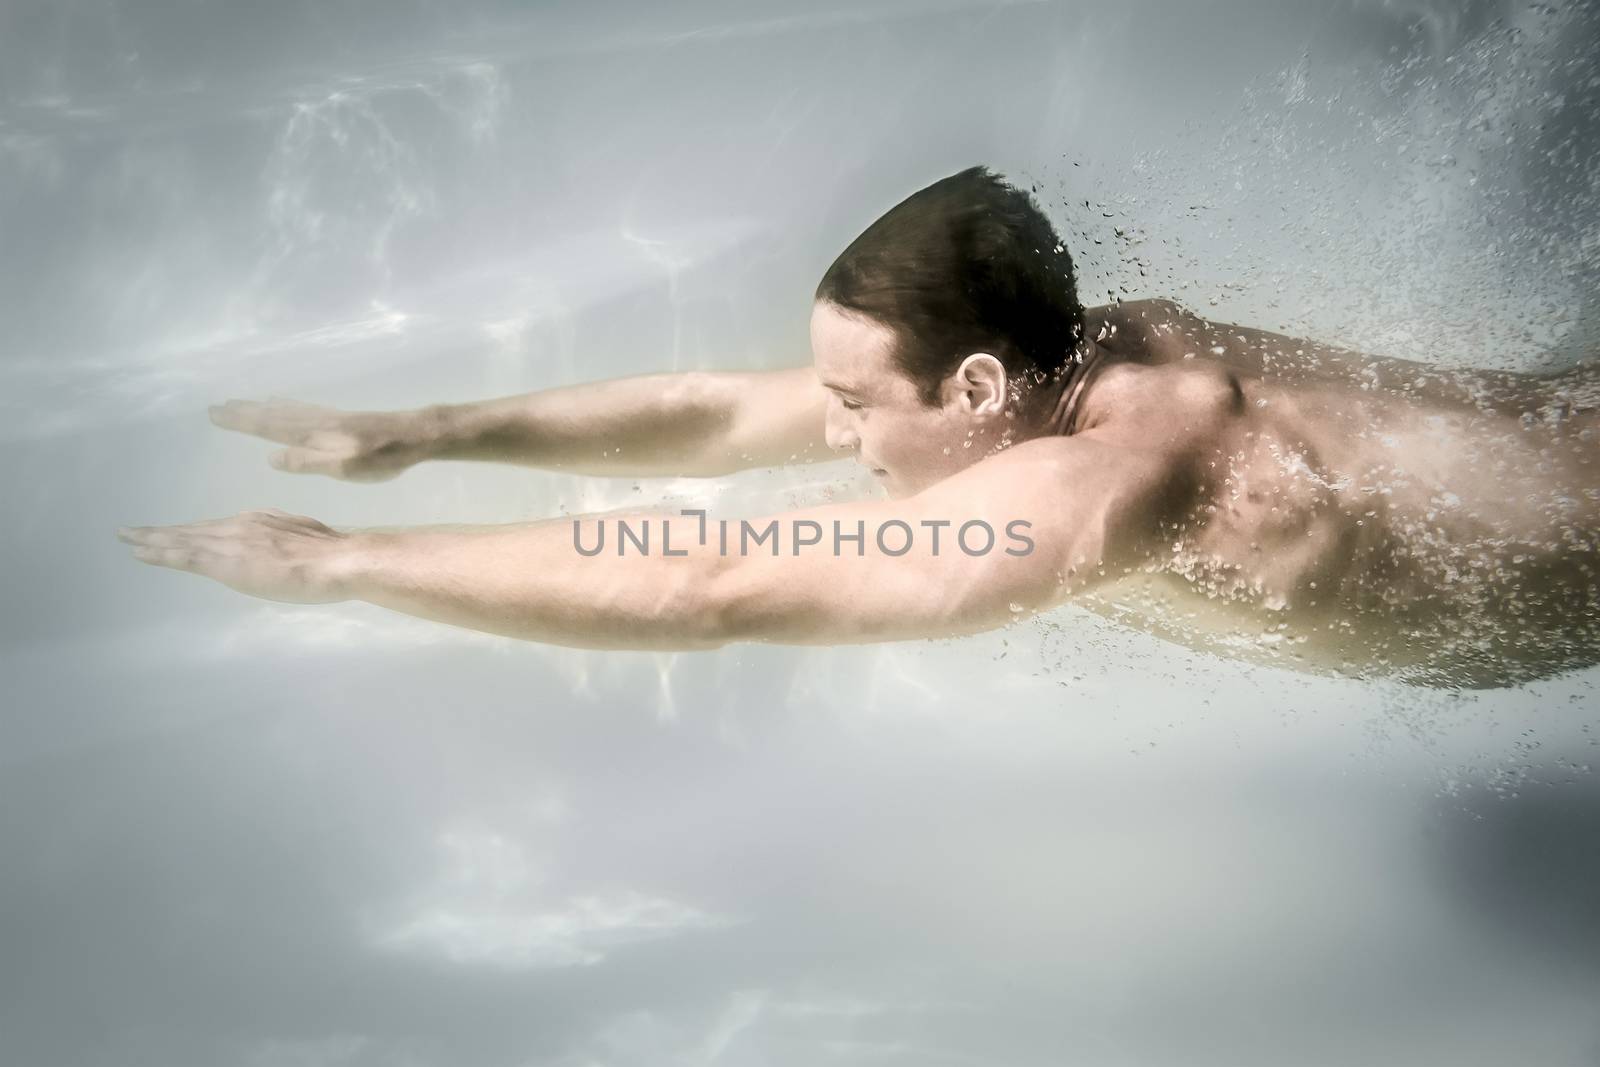 An image of a man diving in a pool